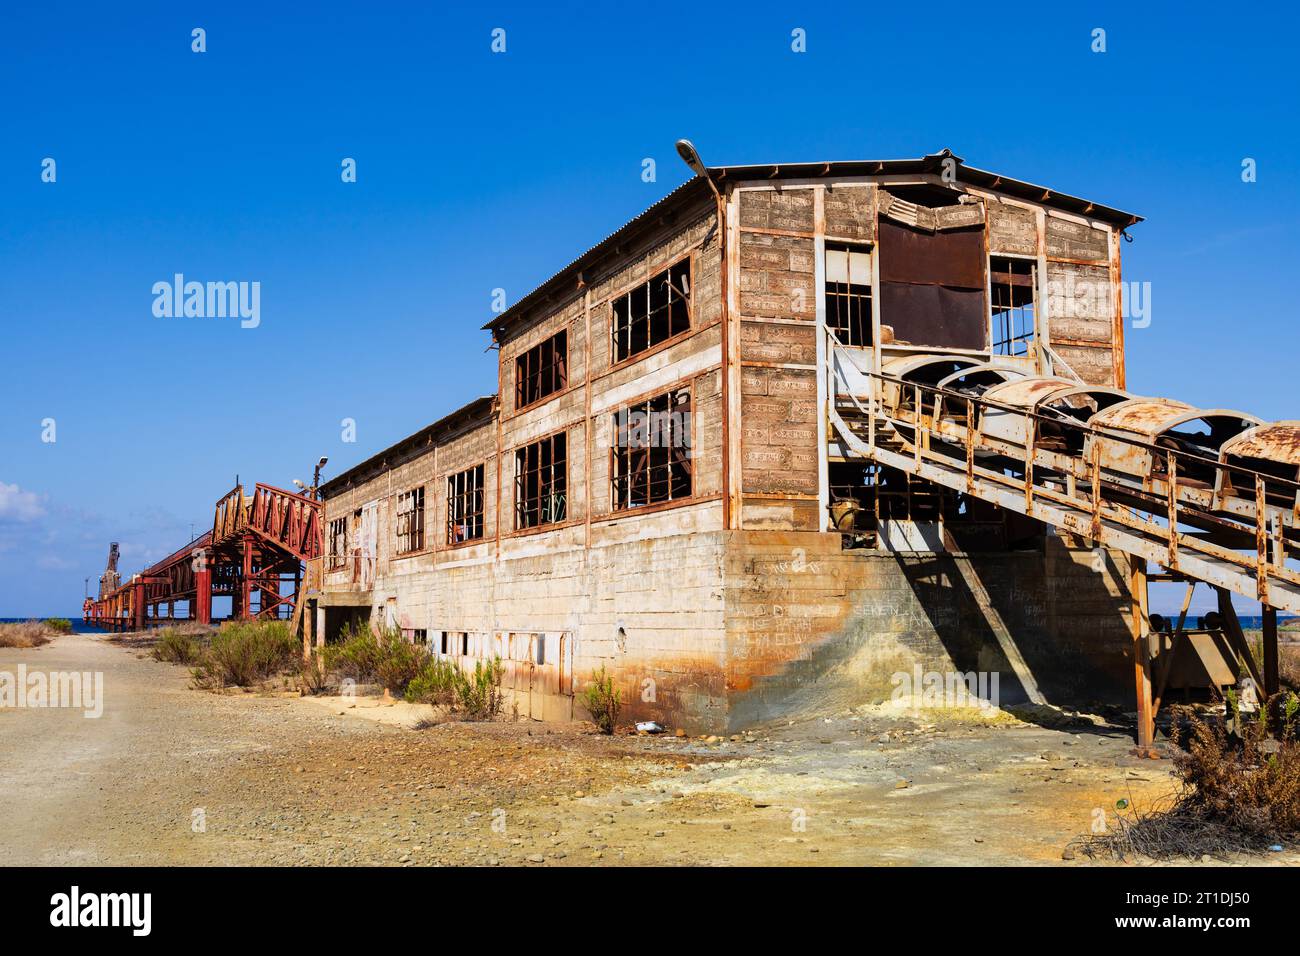 Maden Yukleme iskelesi conveyor system for loading copper to ships in deep water. Owned by the Cyprus Mining Corporation at Guzelyurt, Soloi, Morfou, Stock Photo